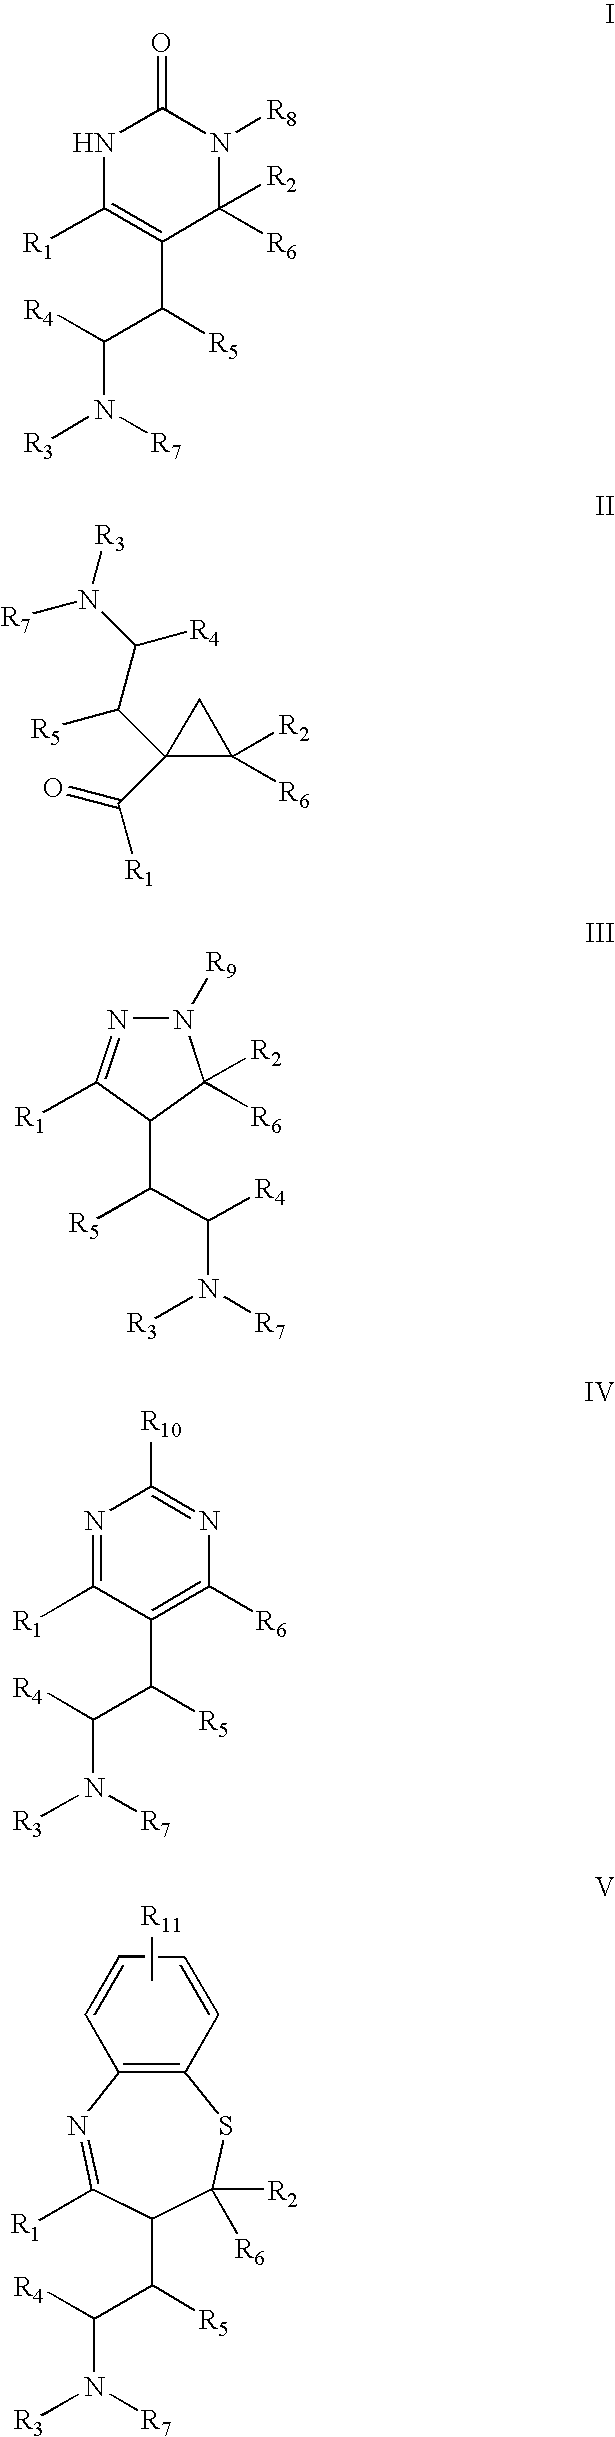 2-Aminoethyl Substituted Pyrimidin-2-Ones Cyclopropanes, Pyrazolines, Pyrimidines and Benzothiazepines and Their Uses as Urotensin II and Somatostatin 5 Receptor Ligands